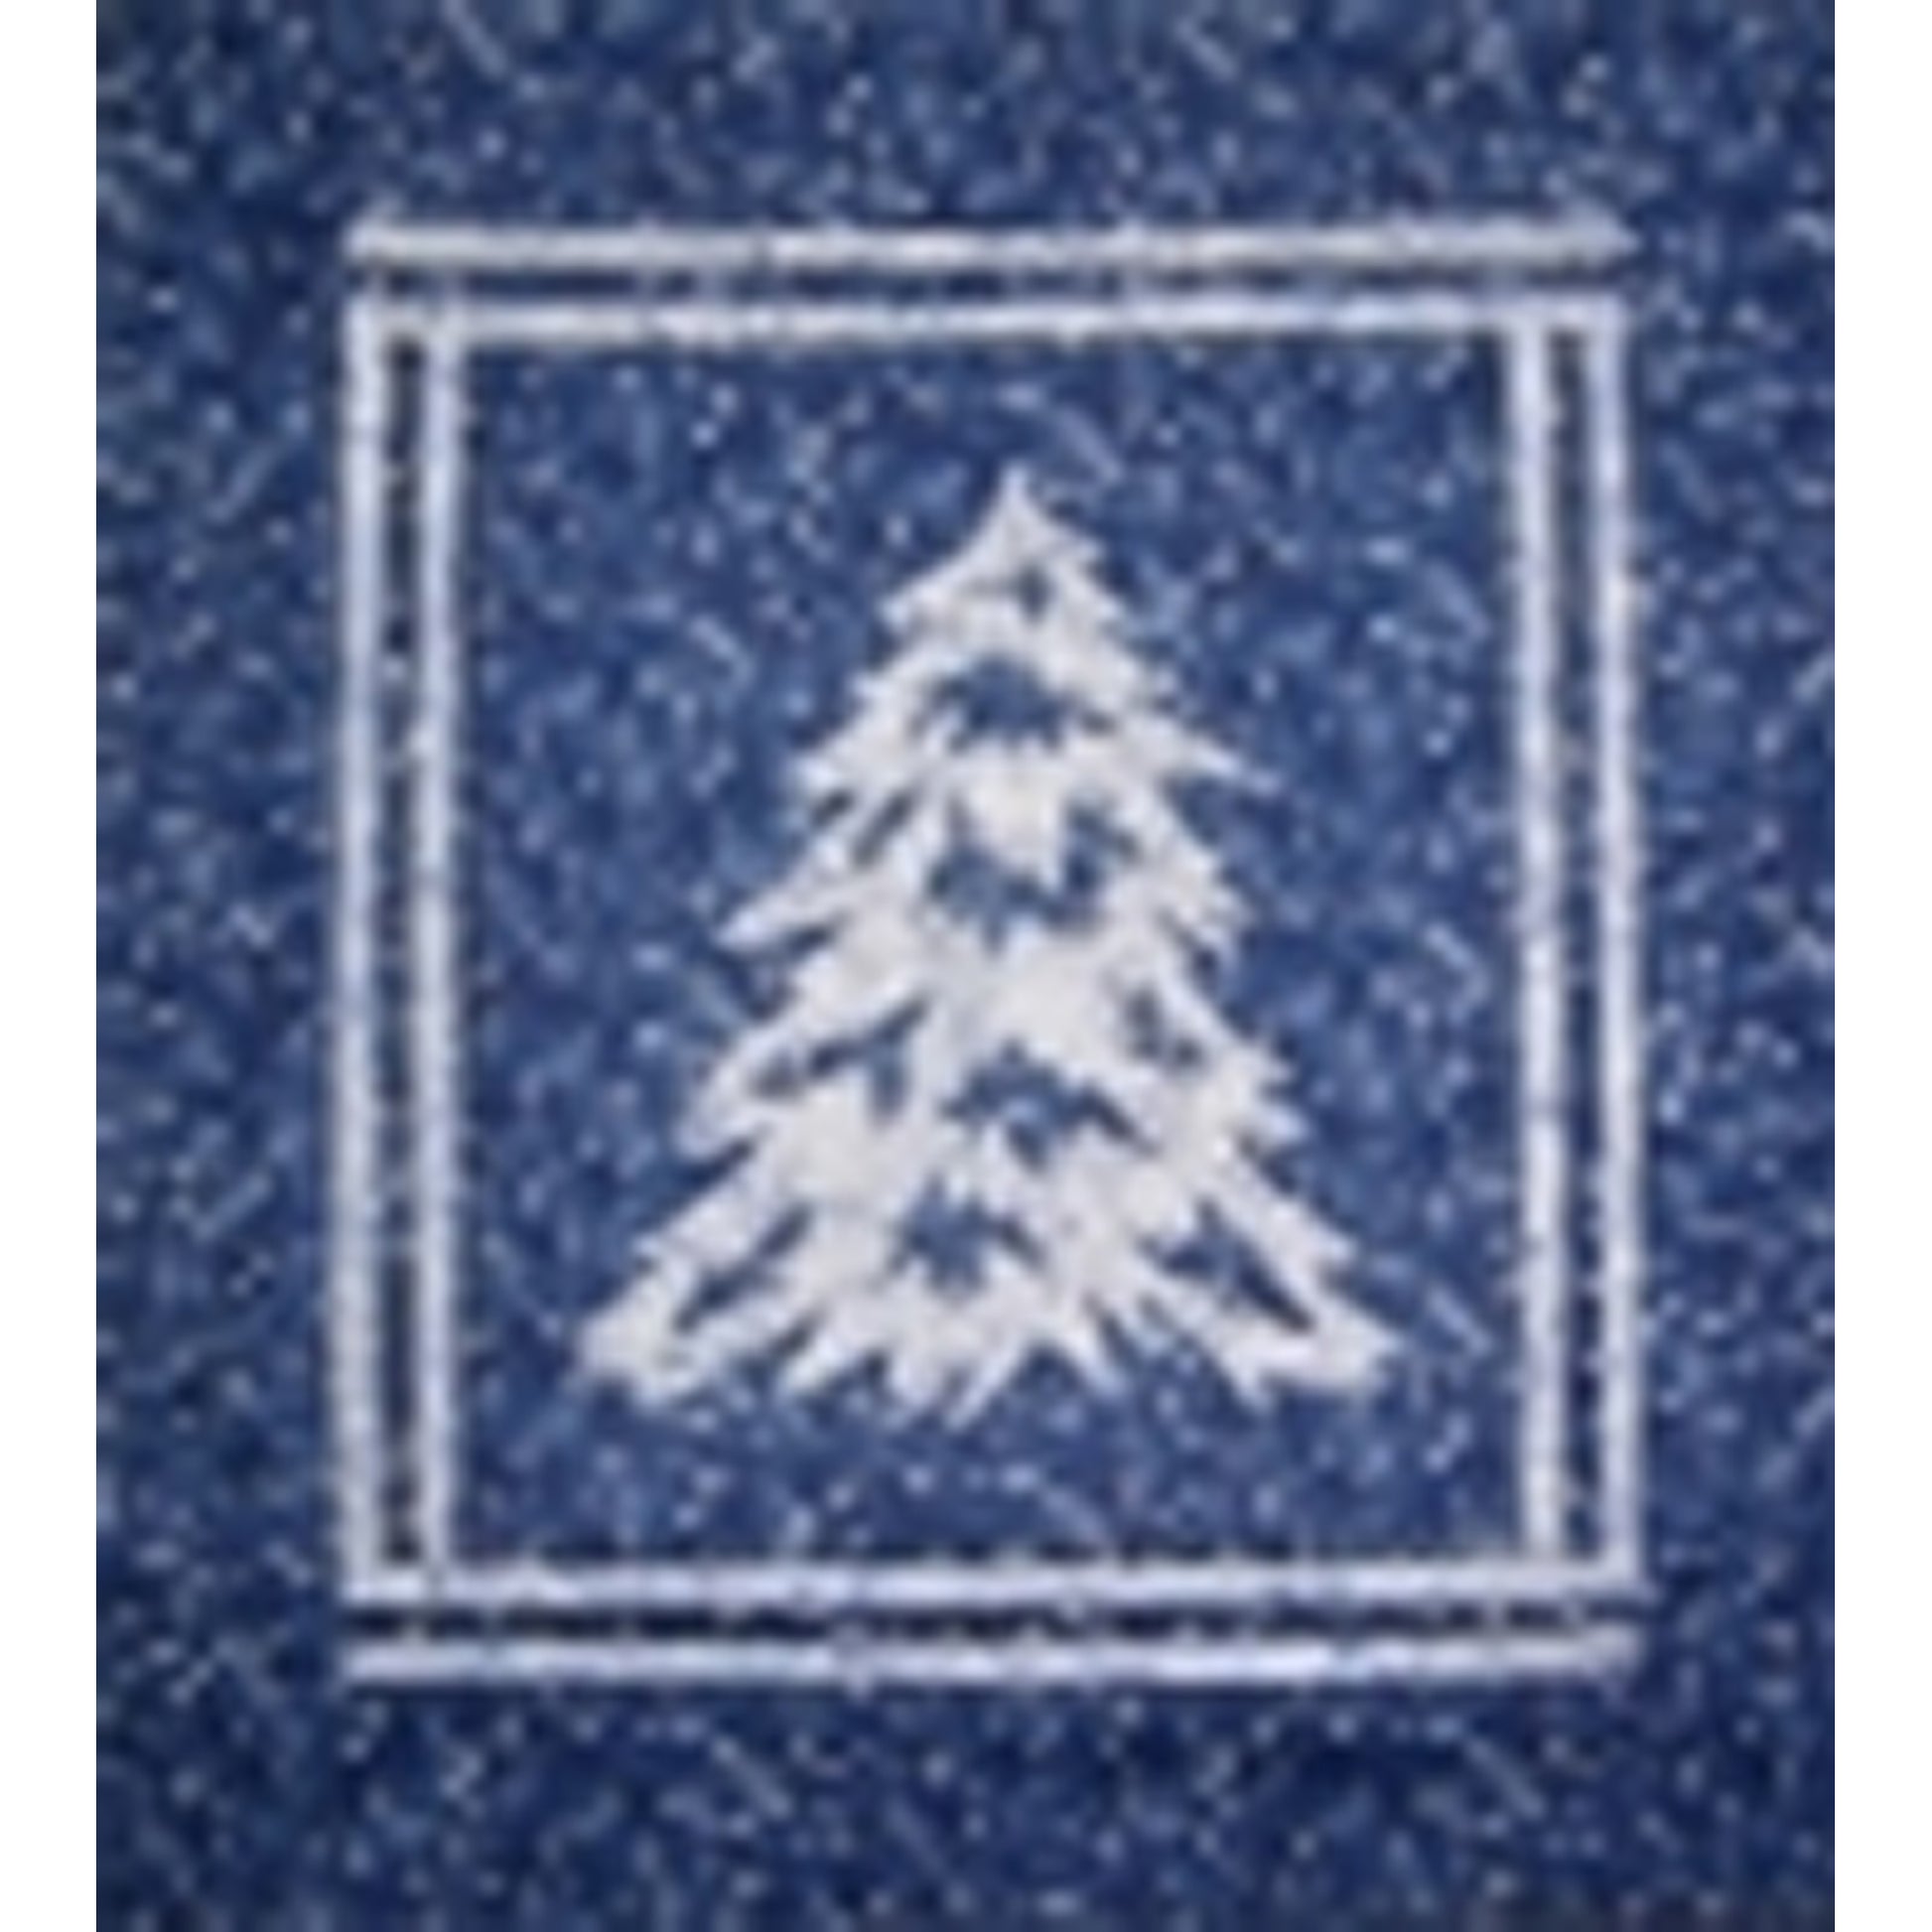 Quilt of a white evergreen tree/outline on a blue background.